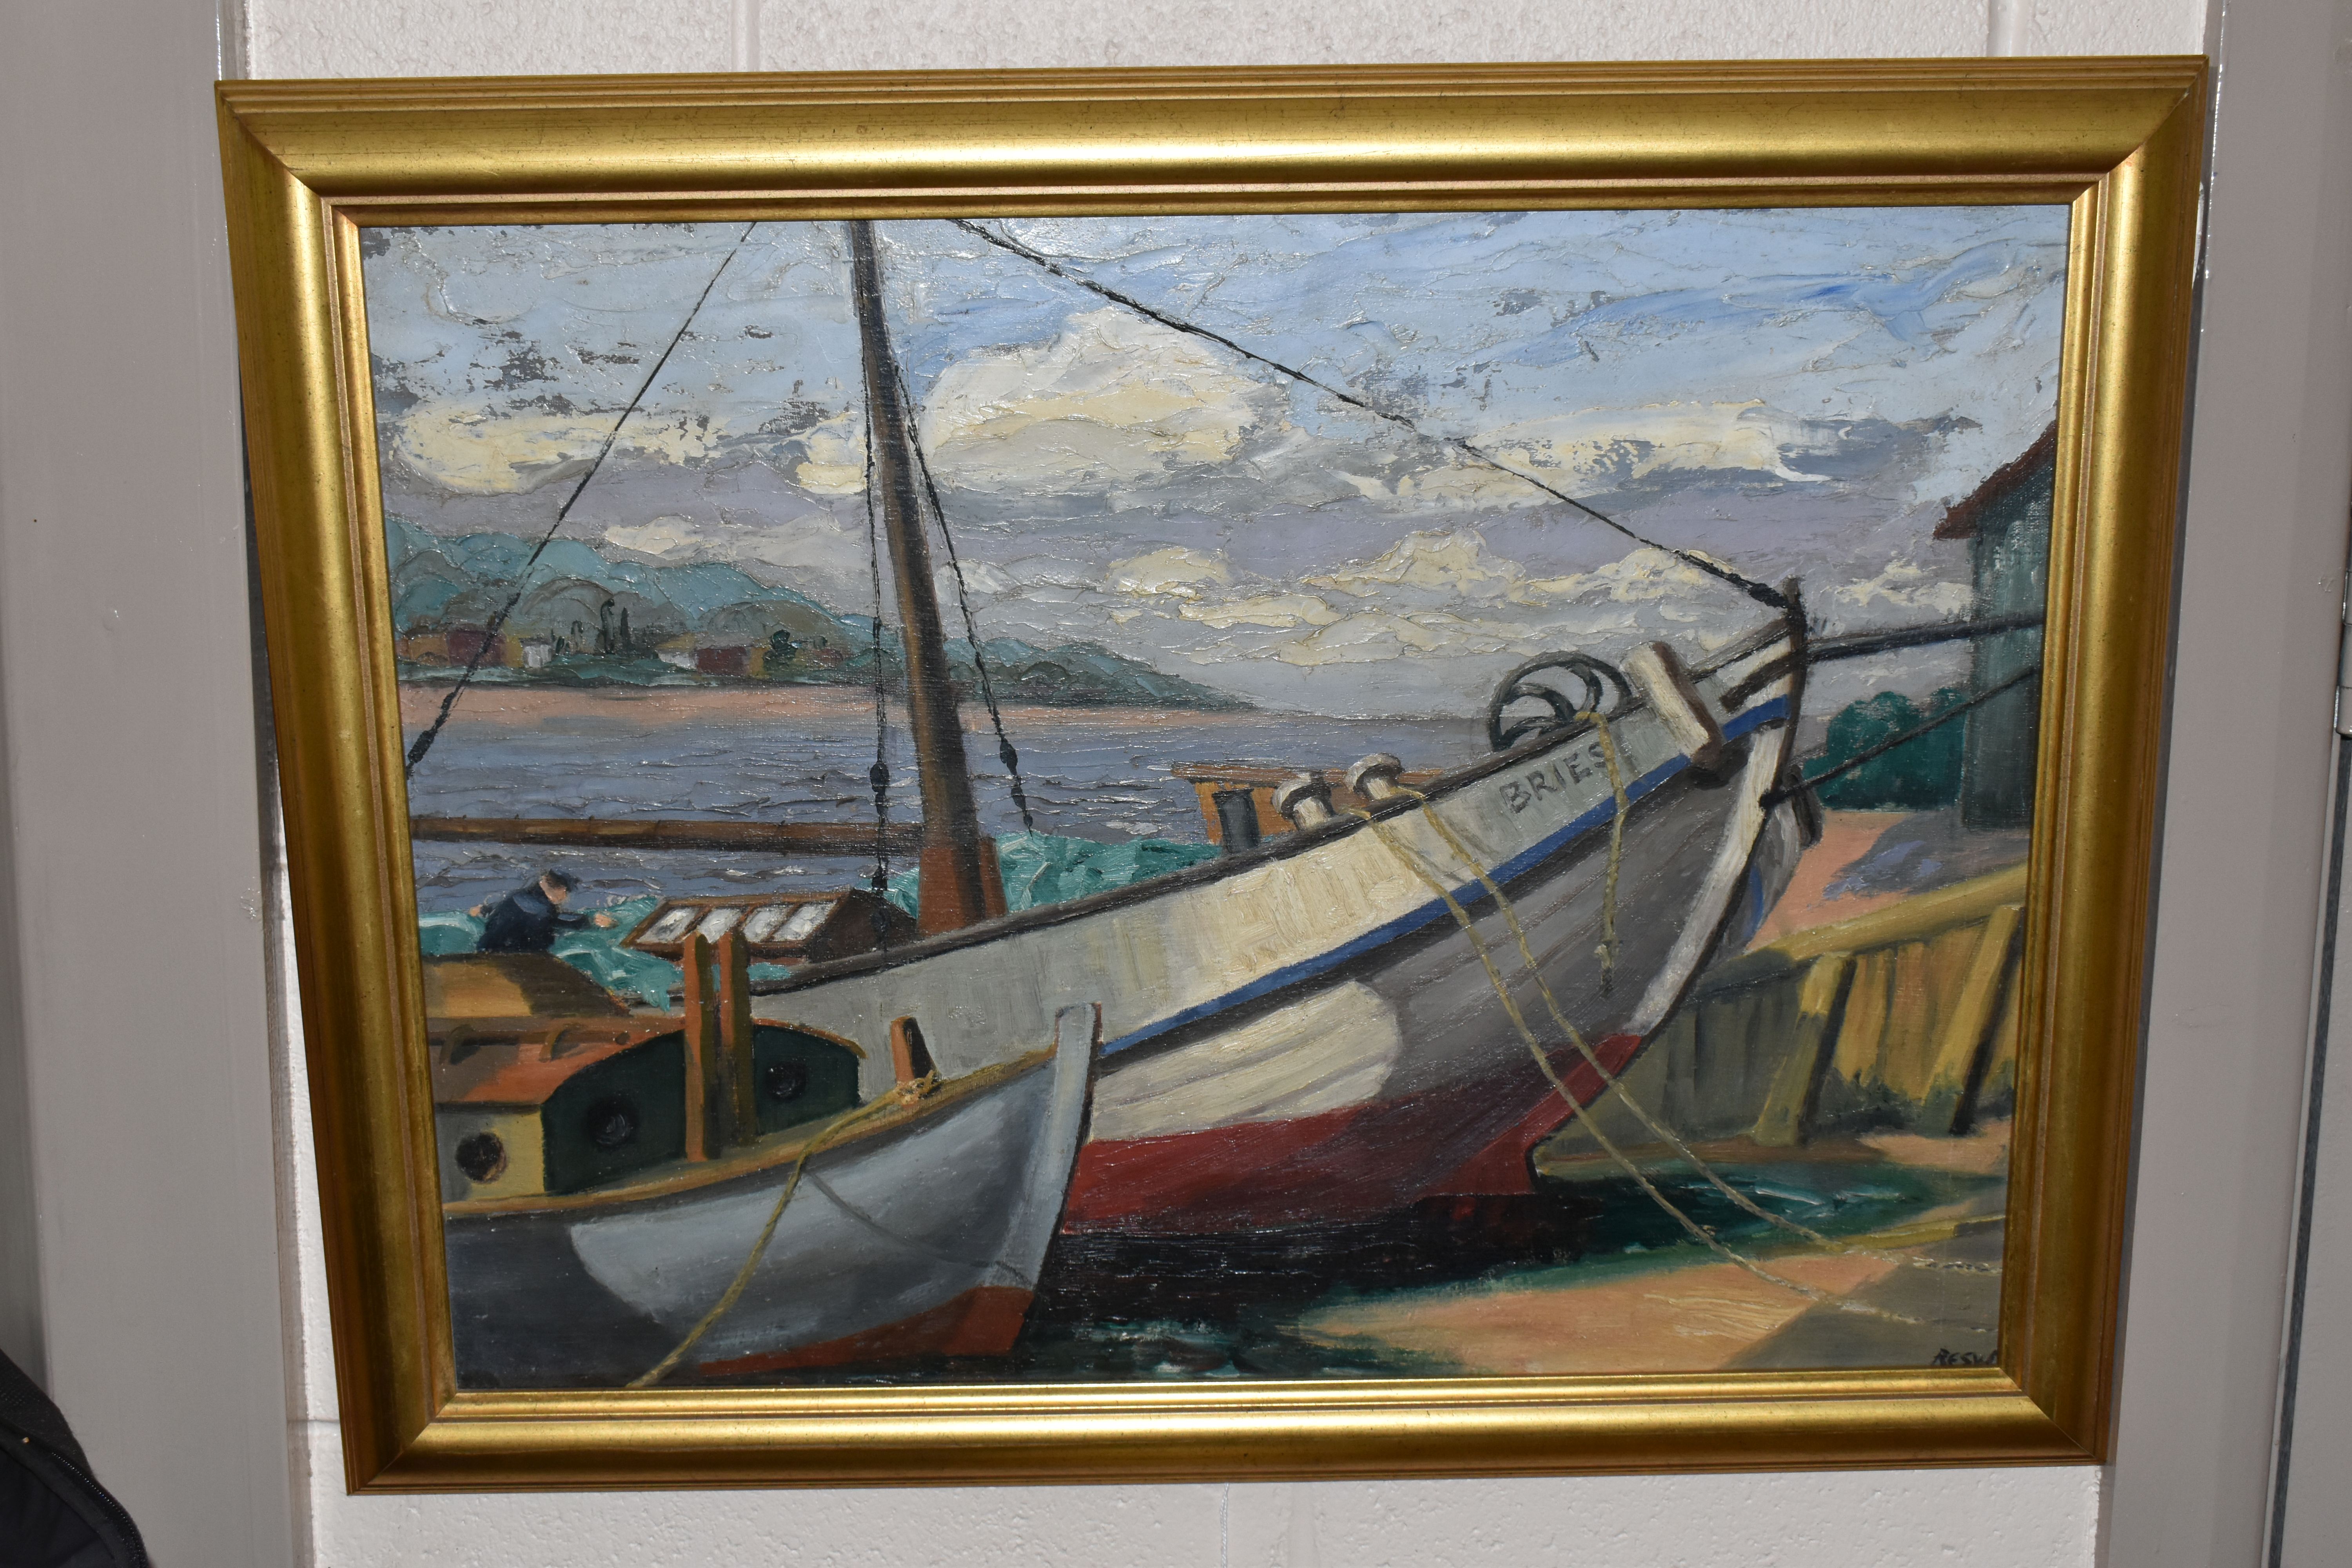 A 20TH CENTURY FISHING BOAT SCENE, two boats are beached at low tide while a male figure tends to